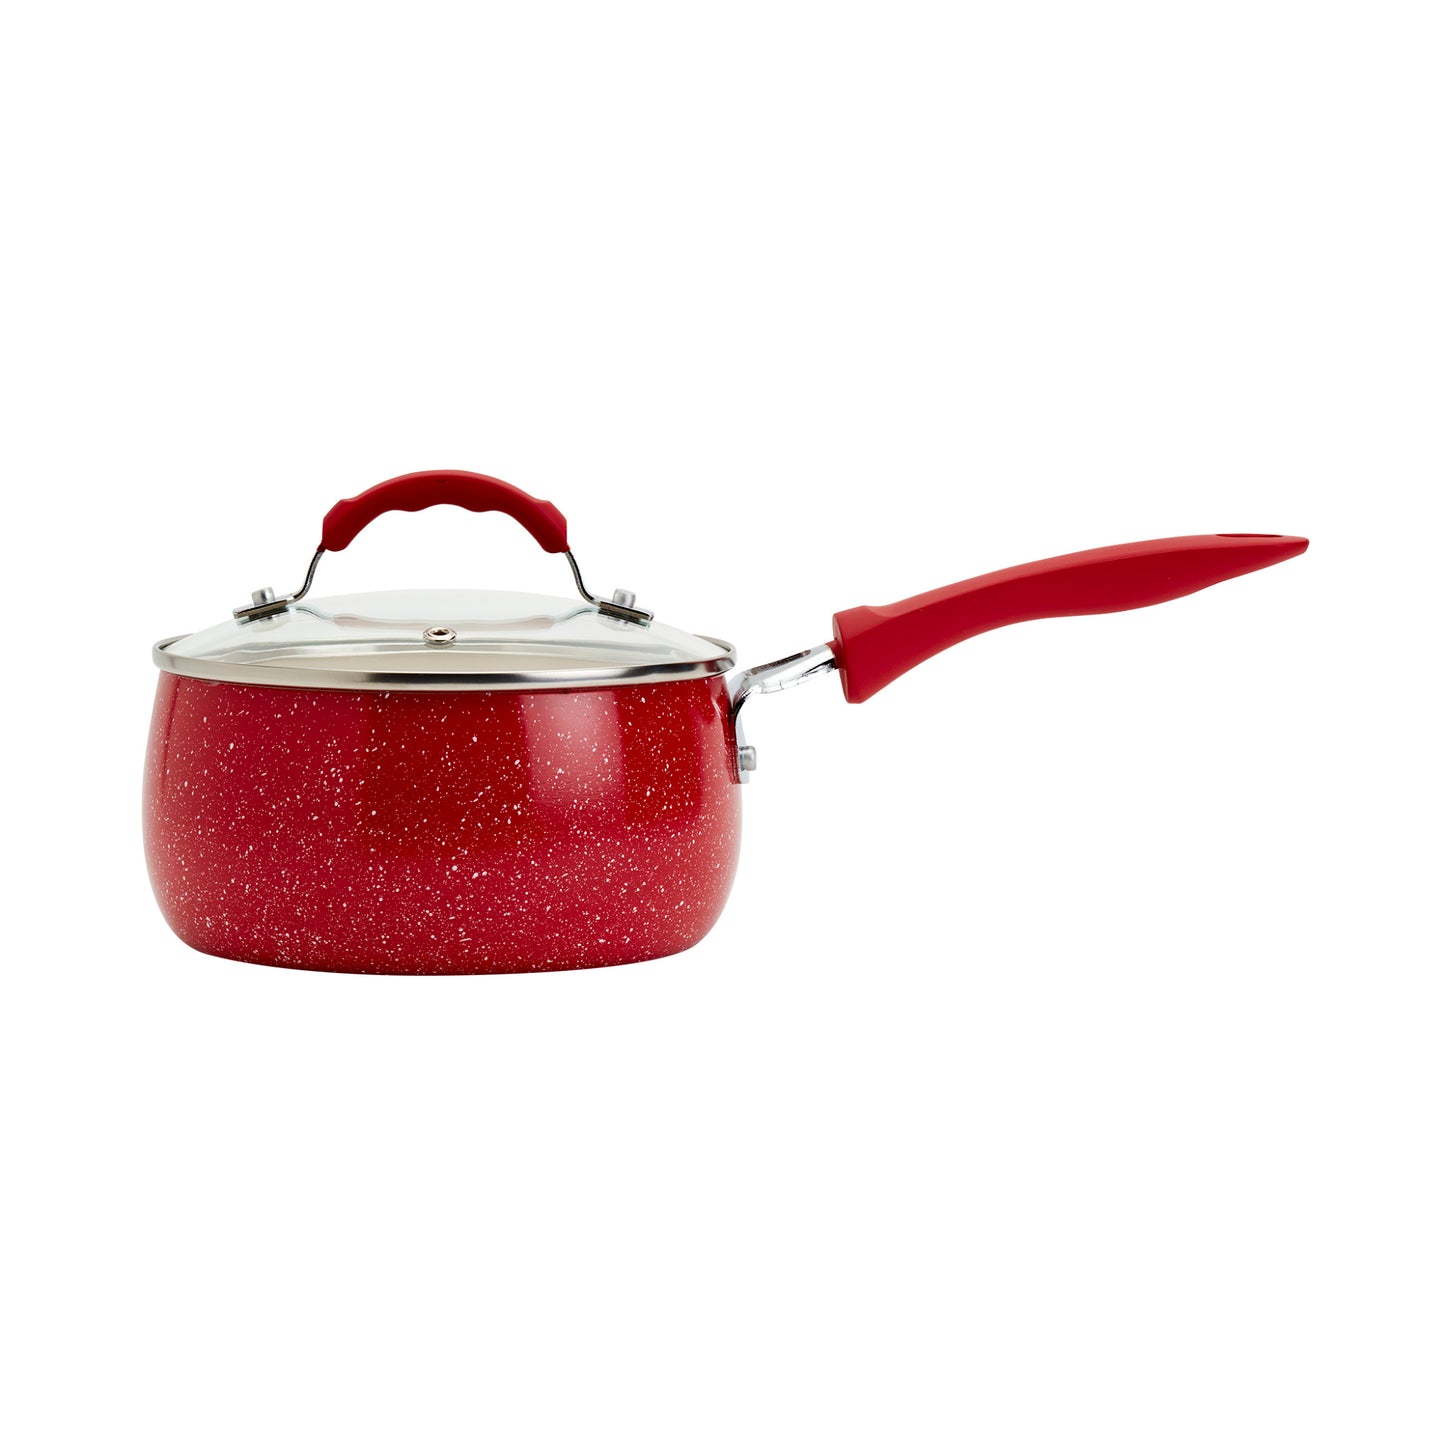 Dolly 2.5Qt Covered Sauce Pan - Speckled Red